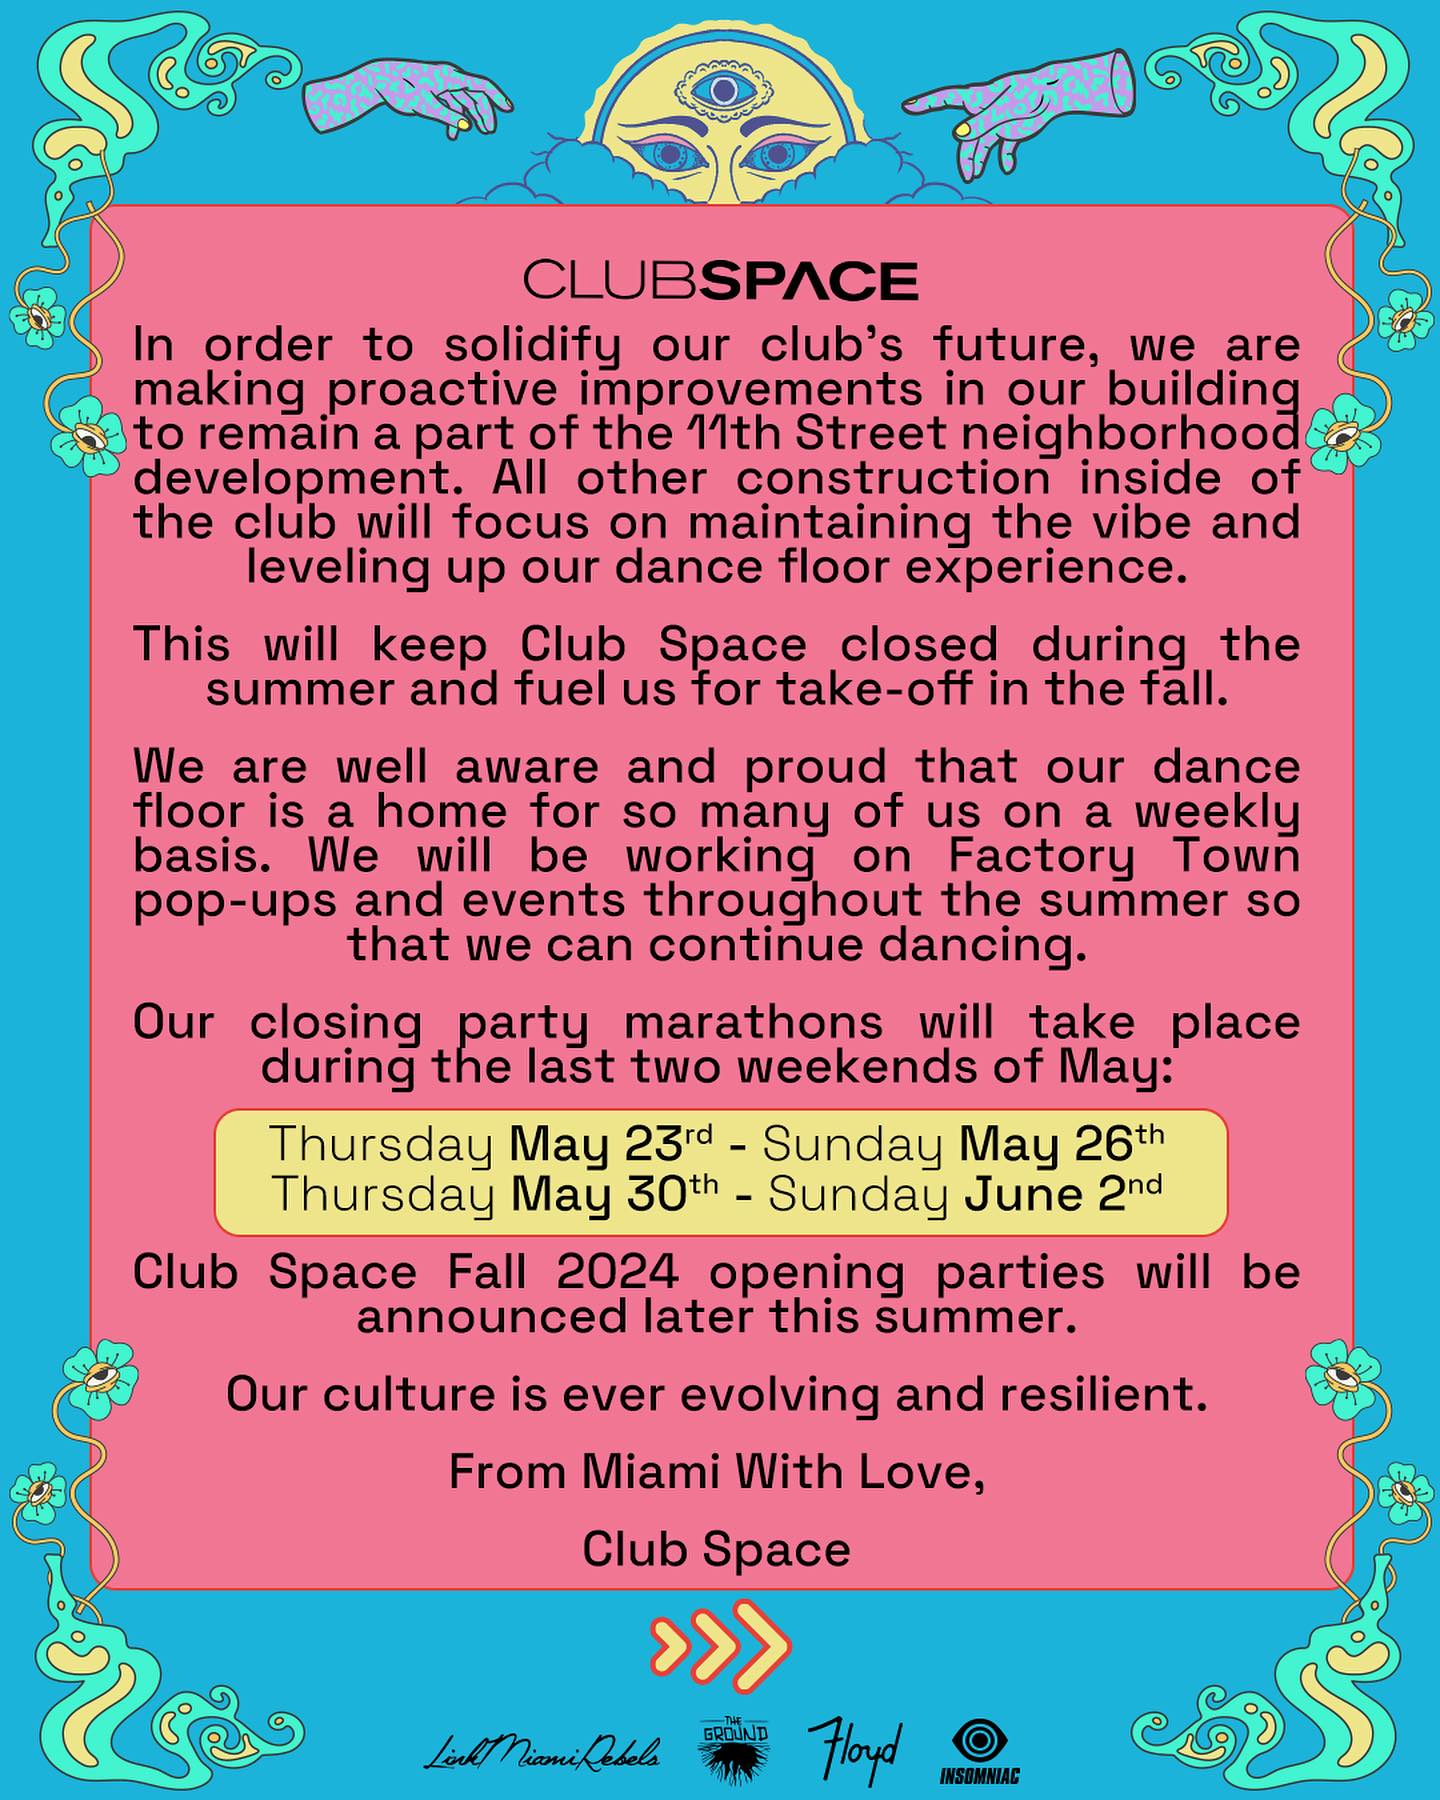 Club Space Announces Summer Closing for Renovations and Safety Upgrades